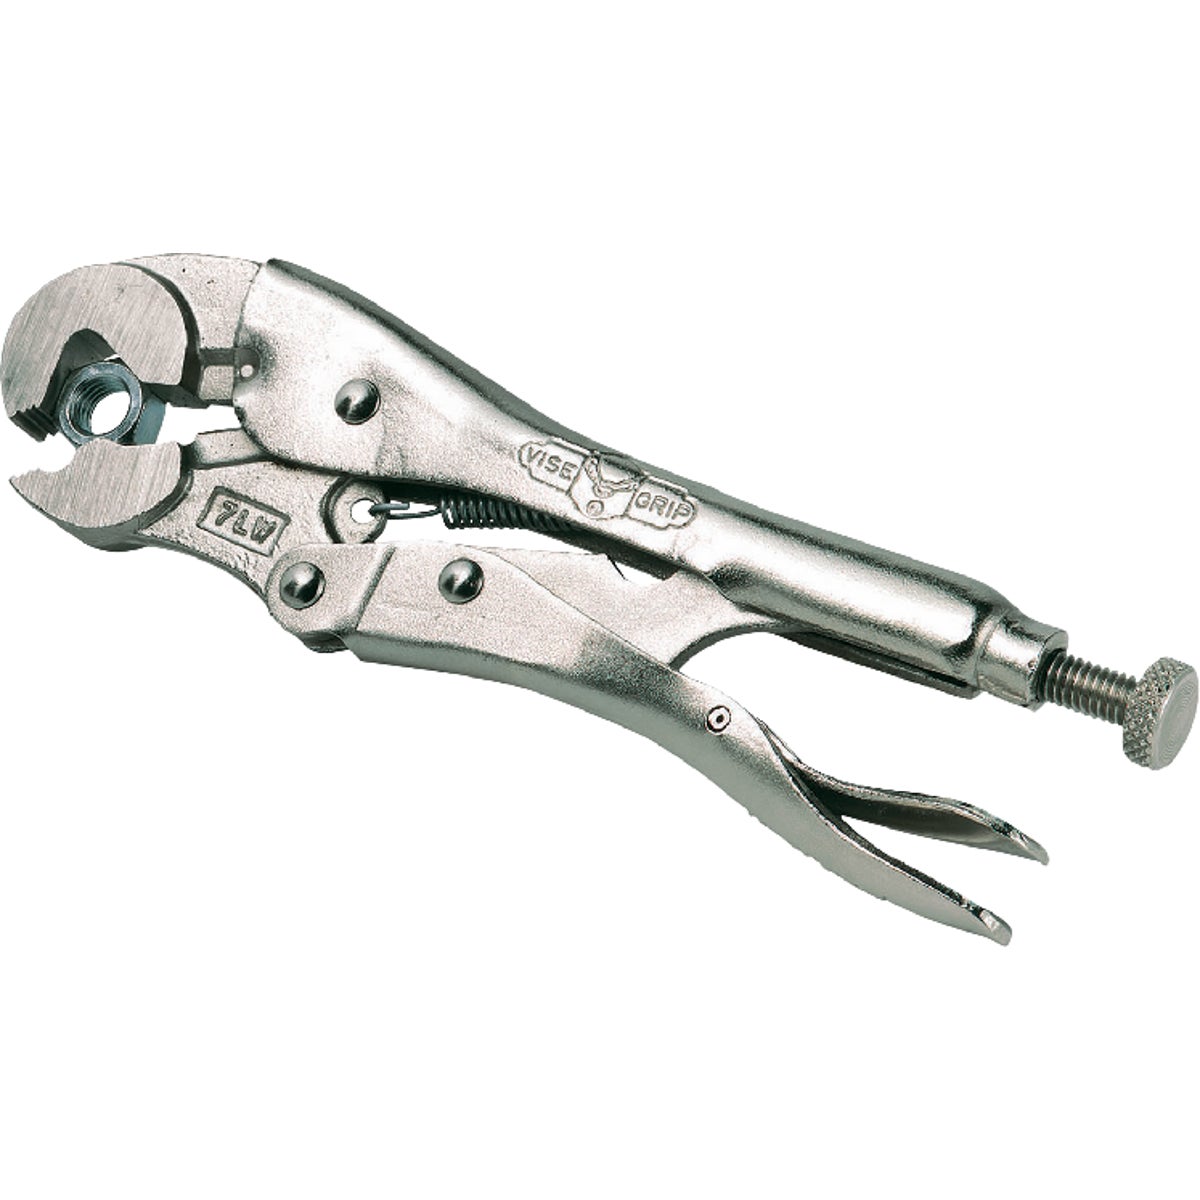 Item 301019, Using proven Vise-Grip technology, this tool locks on 3 sides of a hex head